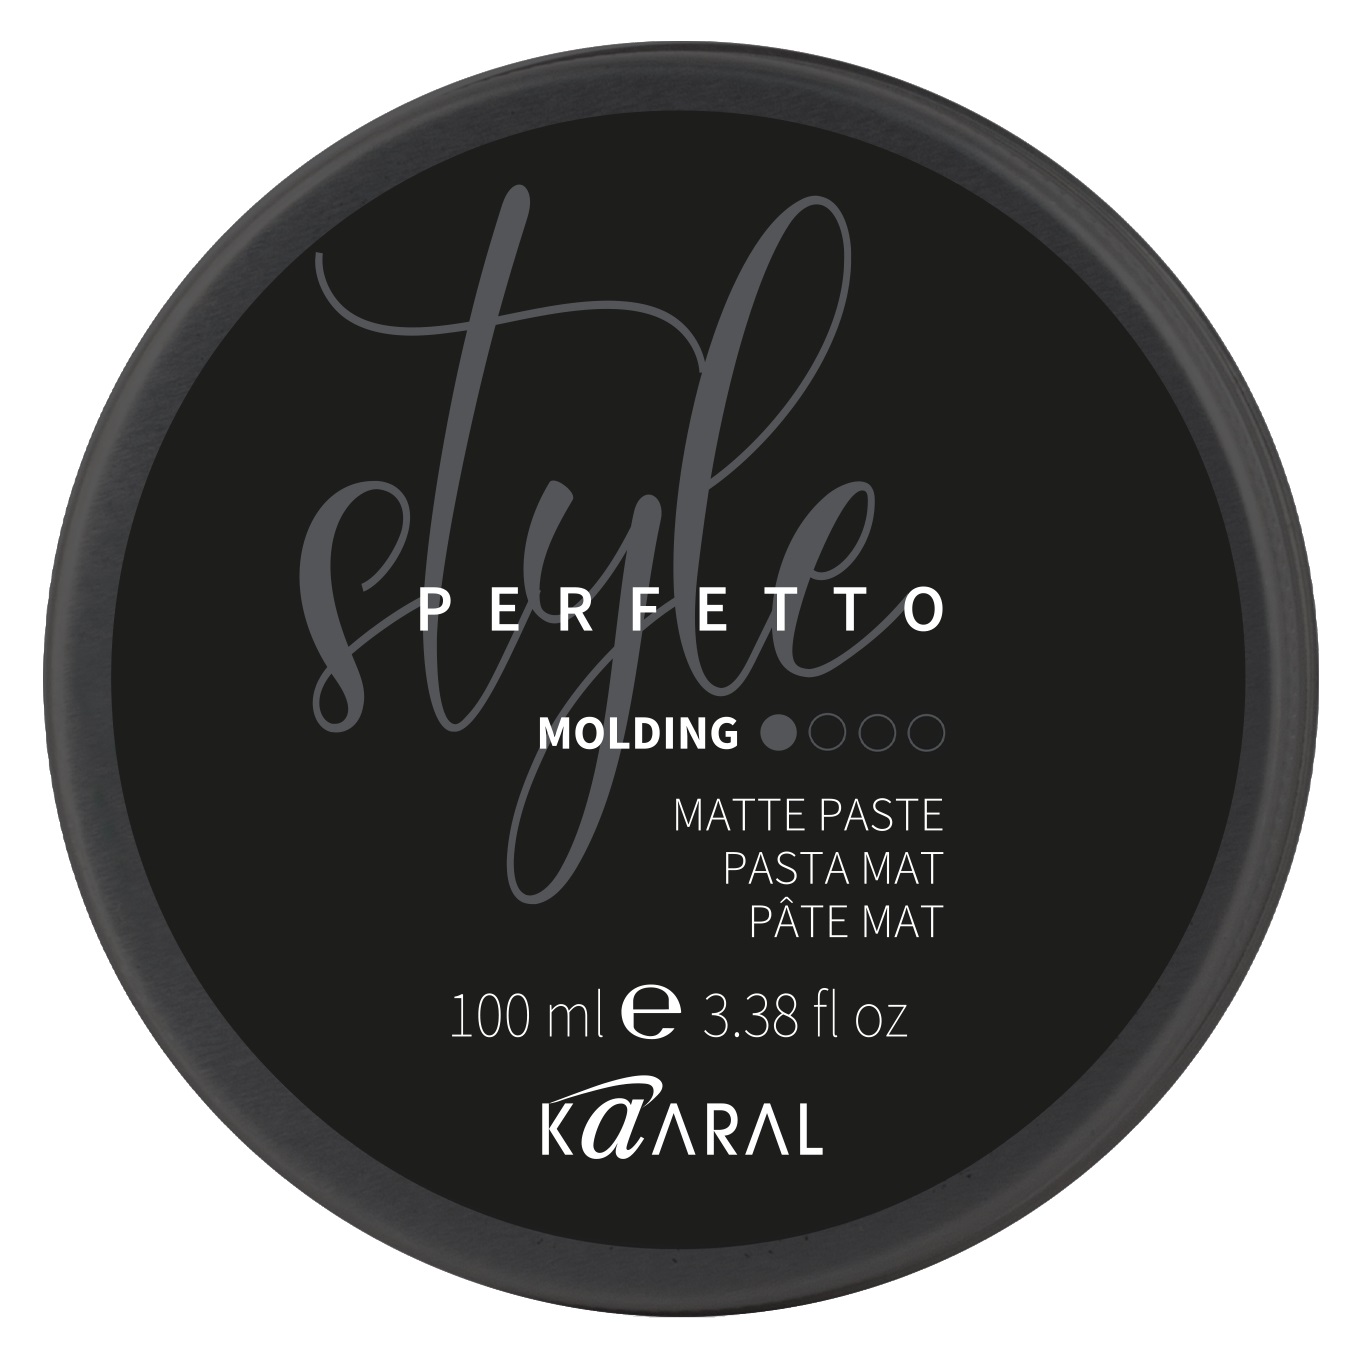 Kaaral Матовая паста Molding Matte Paste, 100 мл (Kaaral, Style Perfetto)